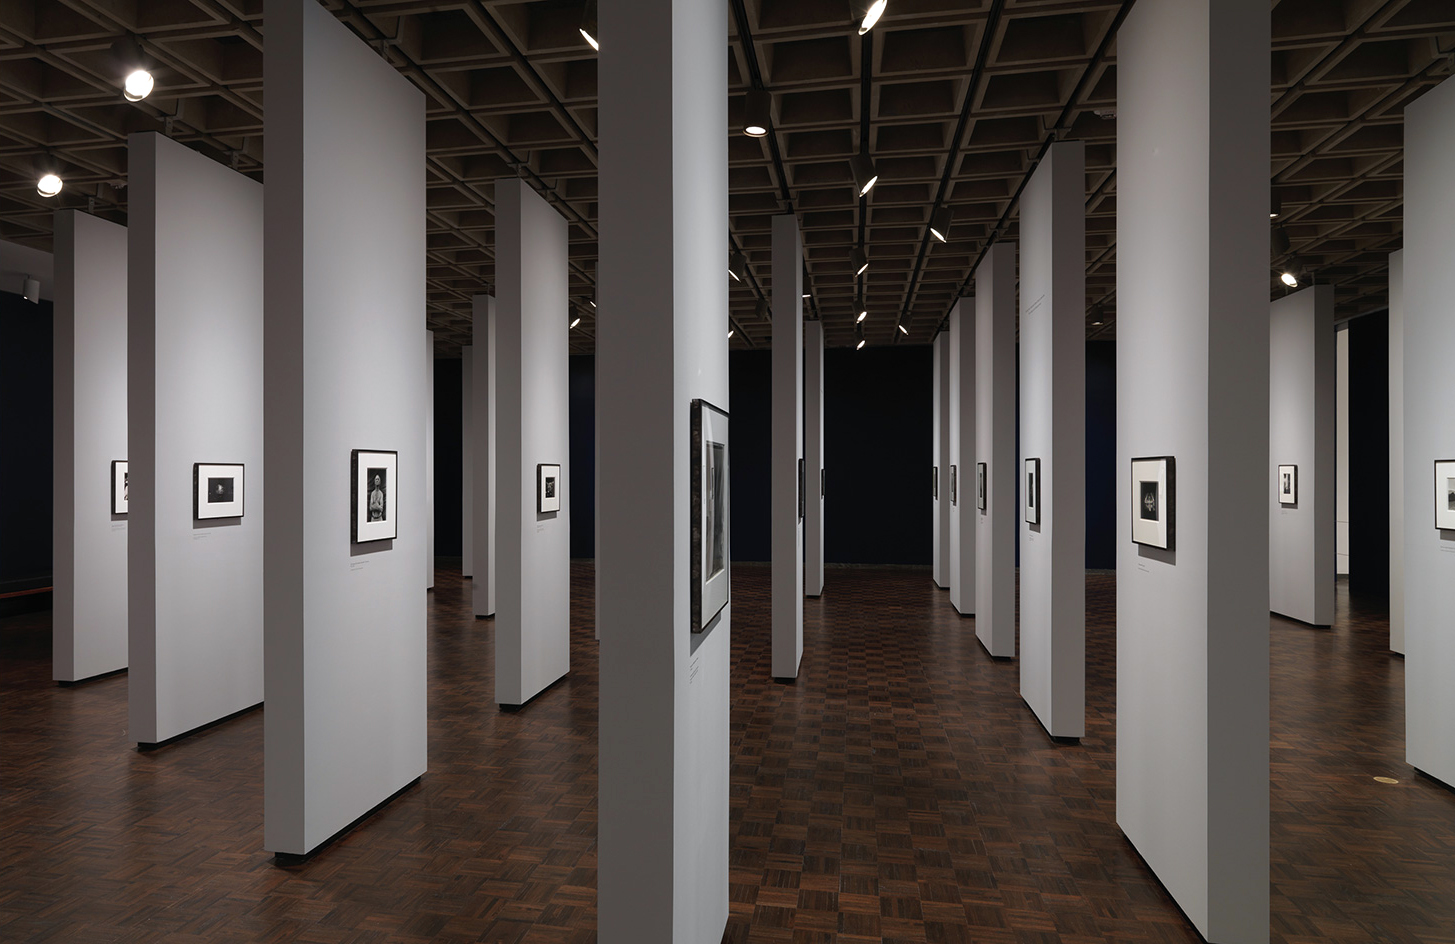 Installation view of the exhibition 'diane arbus: in the beginning' at the Metropolitan Museum of Art, New York